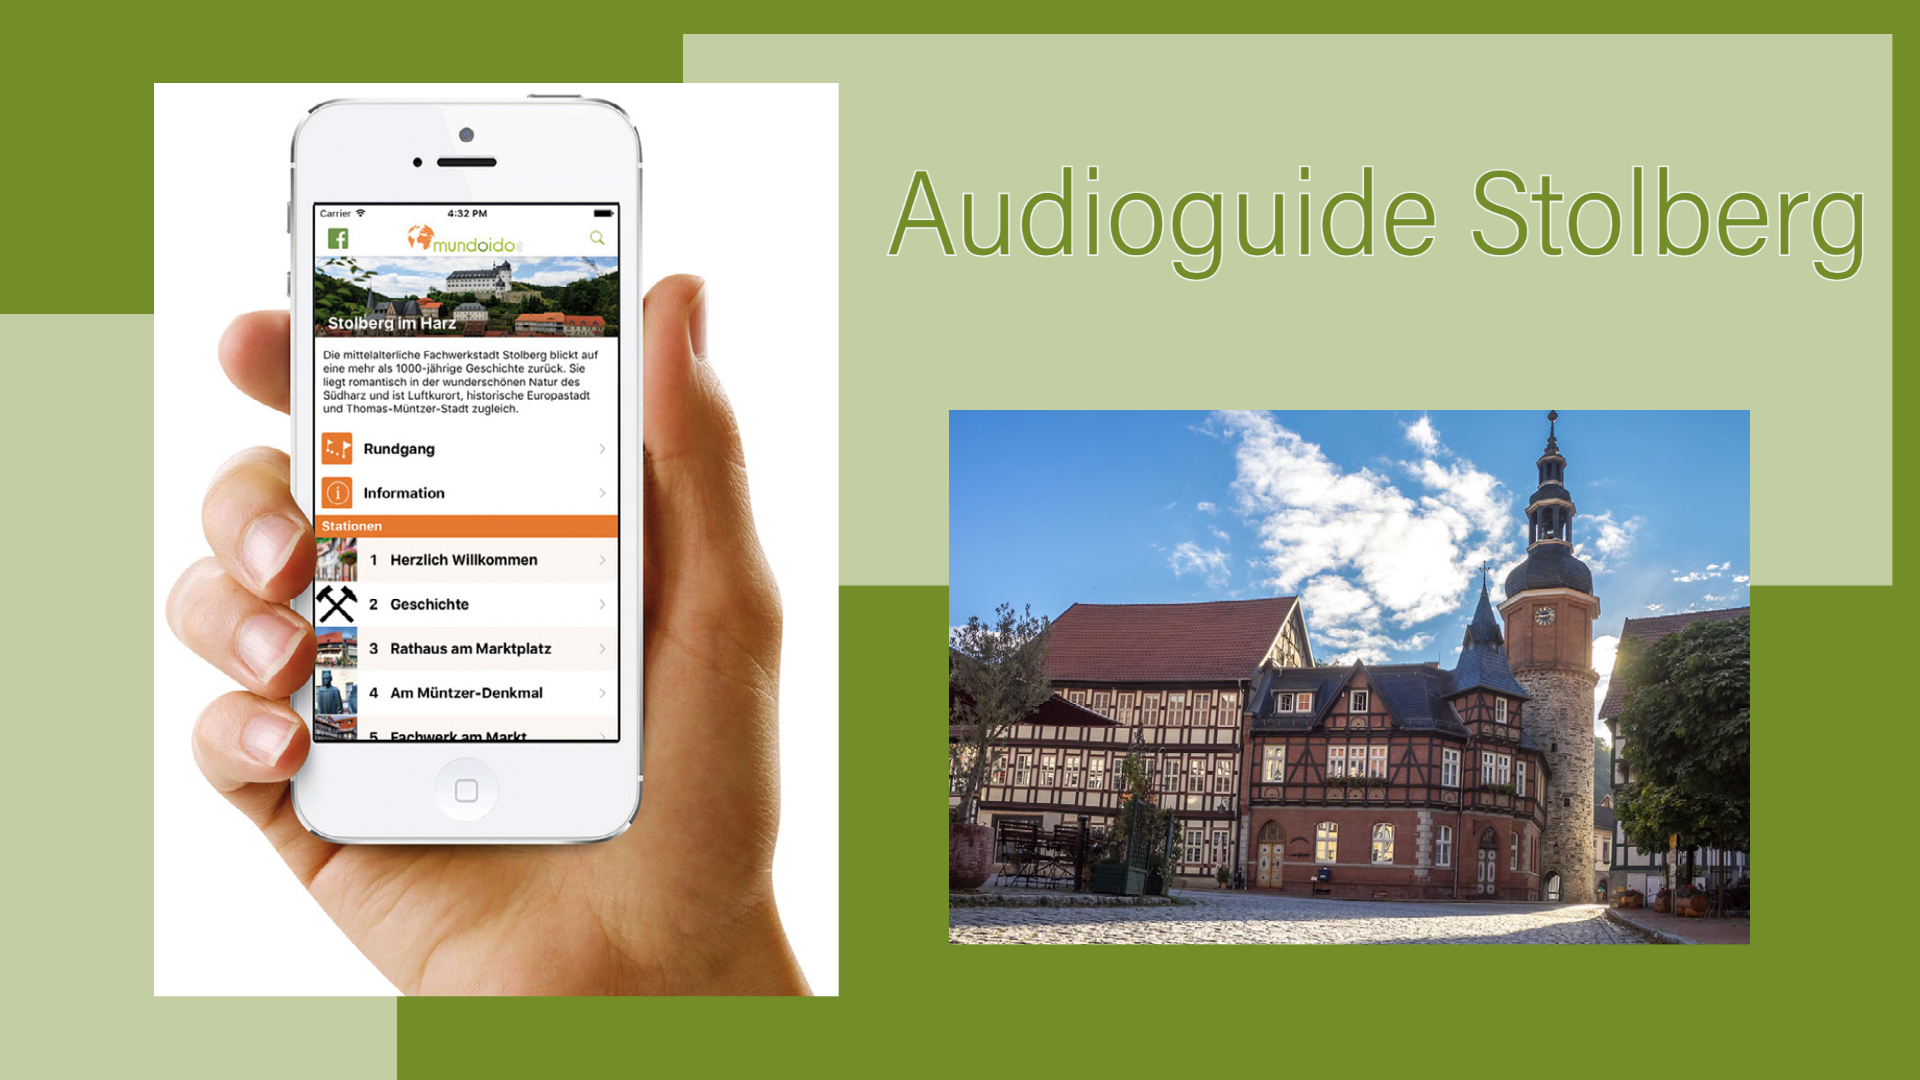 Audioguide Stolberg